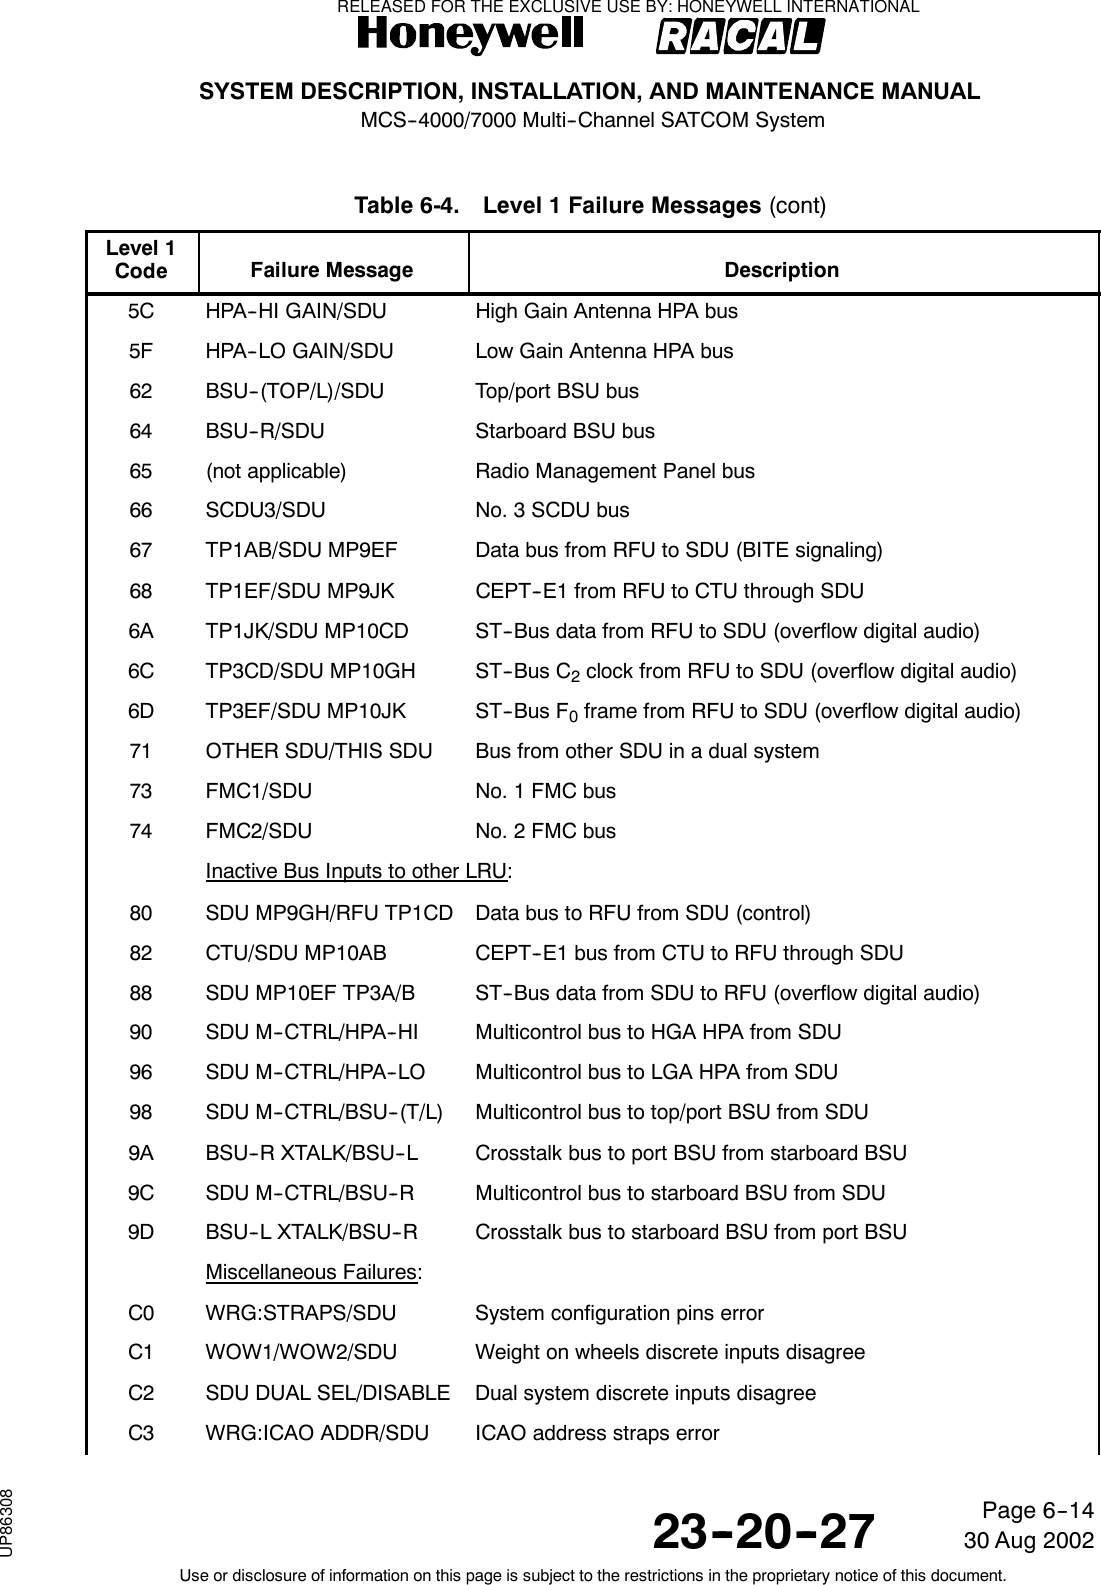 SYSTEM DESCRIPTION, INSTALLATION, AND MAINTENANCE MANUALMCS--4000/7000 Multi--Channel SATCOM System23--20--2730 Aug 2002Use or disclosure of information on this page is subject to the restrictions in the proprietary notice of this document.Page 6--14Table 6-4. Level 1 Failure Messages (cont)Level 1Code DescriptionFailure Message5C HPA--HI GAIN/SDU High Gain Antenna HPA bus5F HPA--LO GAIN/SDU Low Gain Antenna HPA bus62 BSU--(TOP/L)/SDU Top/port BSU bus64 BSU--R/SDU Starboard BSU bus65 (not applicable) Radio Management Panel bus66 SCDU3/SDU No. 3 SCDU bus67 TP1AB/SDU MP9EF Data bus from RFU to SDU (BITE signaling)68 TP1EF/SDU MP9JK CEPT--E1 from RFU to CTU through SDU6A TP1JK/SDU MP10CD ST--Bus data from RFU to SDU (overflow digital audio)6C TP3CD/SDU MP10GH ST--Bus C2clock from RFU to SDU (overflow digital audio)6D TP3EF/SDU MP10JK ST--Bus F0frame from RFU to SDU (overflow digital audio)71 OTHER SDU/THIS SDU Bus from other SDU in a dual system73 FMC1/SDU No. 1 FMC bus74 FMC2/SDU No. 2 FMC busInactive Bus Inputs to other LRU:80 SDU MP9GH/RFU TP1CD Data bus to RFU from SDU (control)82 CTU/SDU MP10AB CEPT--E1 bus from CTU to RFU through SDU88 SDU MP10EF TP3A/B ST--Bus data from SDU to RFU (overflow digital audio)90 SDU M--CTRL/HPA--HI Multicontrol bus to HGA HPA from SDU96 SDU M--CTRL/HPA--LO Multicontrol bus to LGA HPA from SDU98 SDU M--CTRL/BSU--(T/L) Multicontrol bus to top/port BSU from SDU9A BSU--R XTALK/BSU--L Crosstalk bus to port BSU from starboard BSU9C SDU M--CTRL/BSU--R Multicontrol bus to starboard BSU from SDU9D BSU--L XTALK/BSU--R Crosstalk bus to starboard BSU from port BSUMiscellaneous Failures:C0 WRG:STRAPS/SDU System configuration pins errorC1 WOW1/WOW2/SDU Weight on wheels discrete inputs disagreeC2 SDU DUAL SEL/DISABLE Dual system discrete inputs disagreeC3 WRG:ICAO ADDR/SDU ICAO address straps errorRELEASED FOR THE EXCLUSIVE USE BY: HONEYWELL INTERNATIONALUP86308